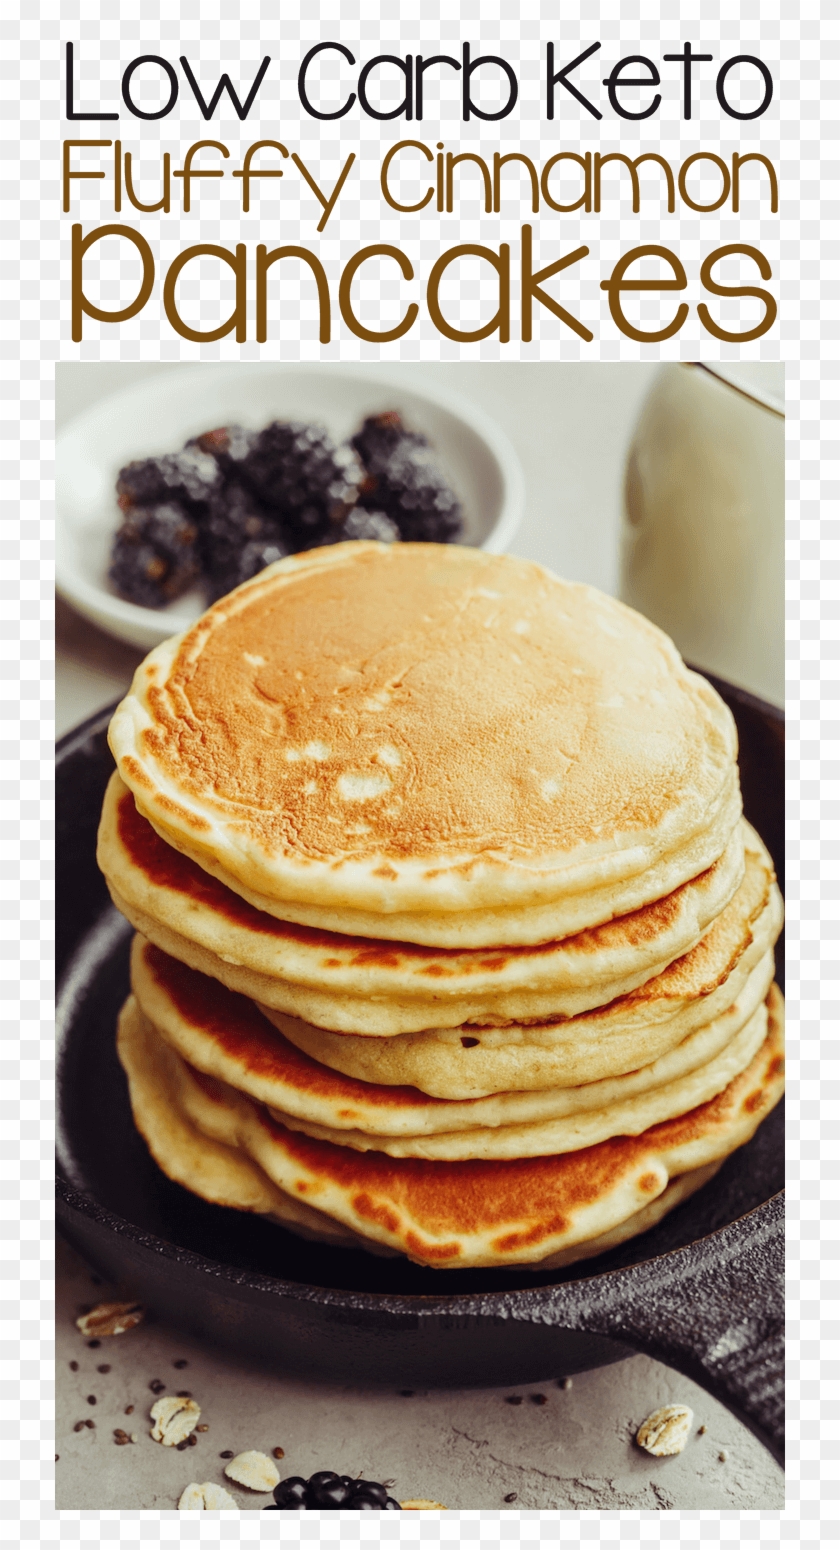 Healthy Low Carb Keto Fluffy Pancake Recipe Made With - Pannekoek Clipart #3485391